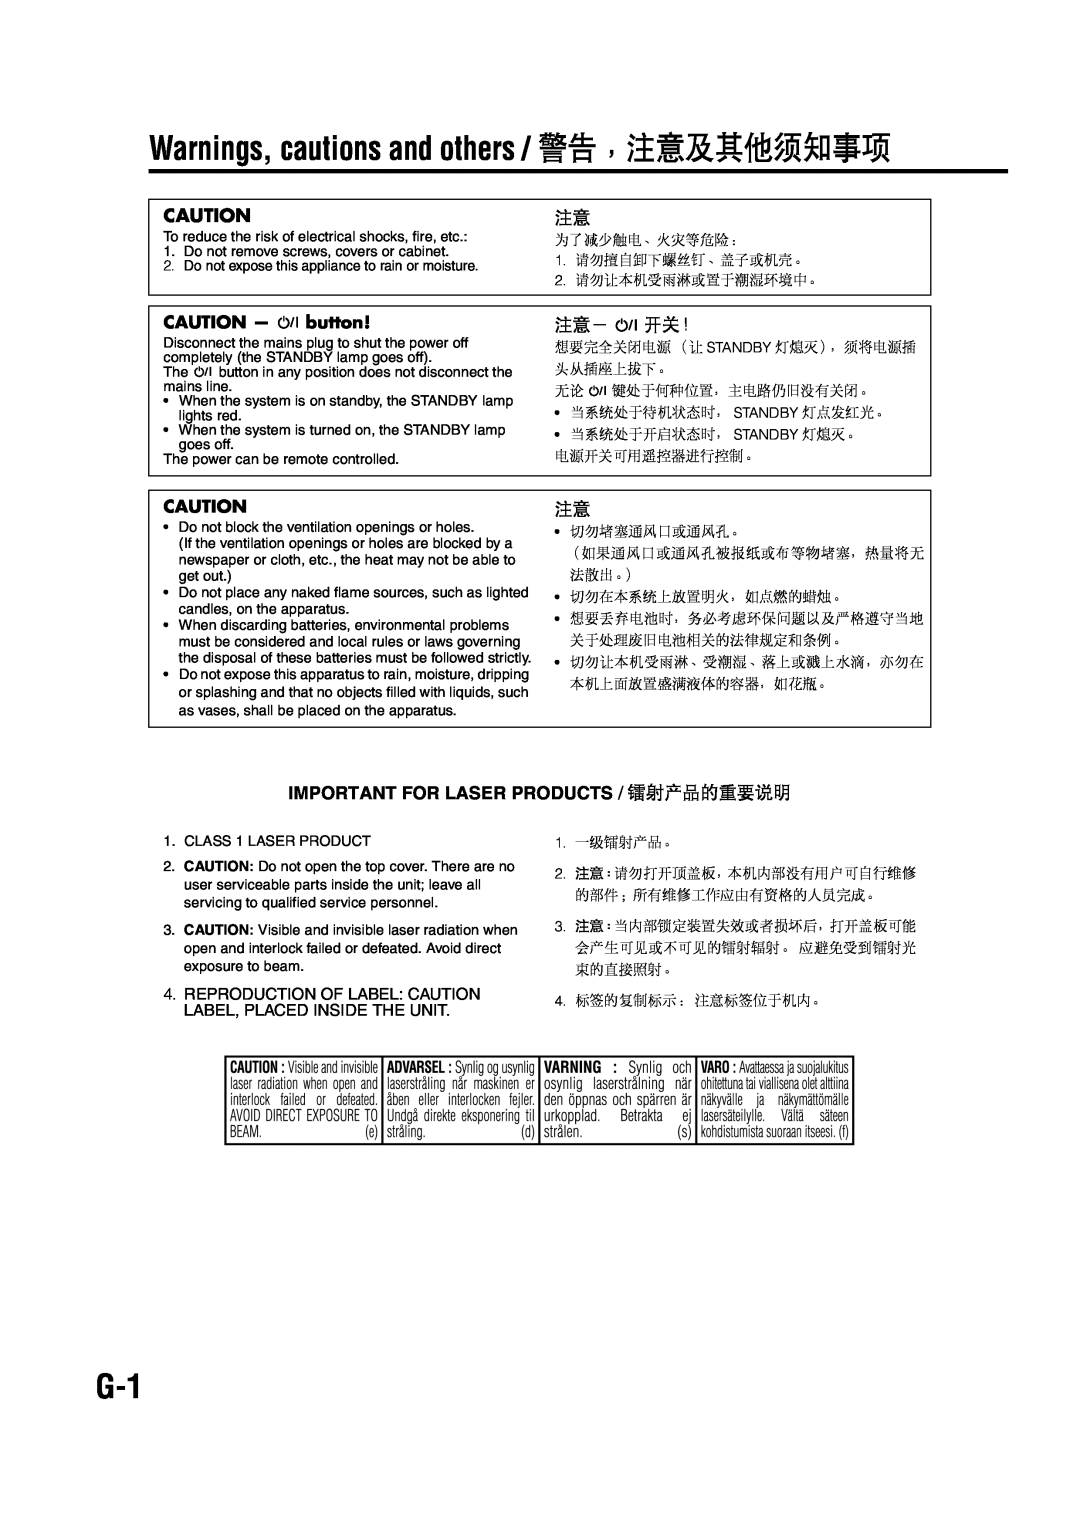 JVC EX-A1 manual Warnings, cautions and others / 警告，注意及其他须知事项, CAUTION — F button, Important For Laser Products / 镭射产品的重要说明 